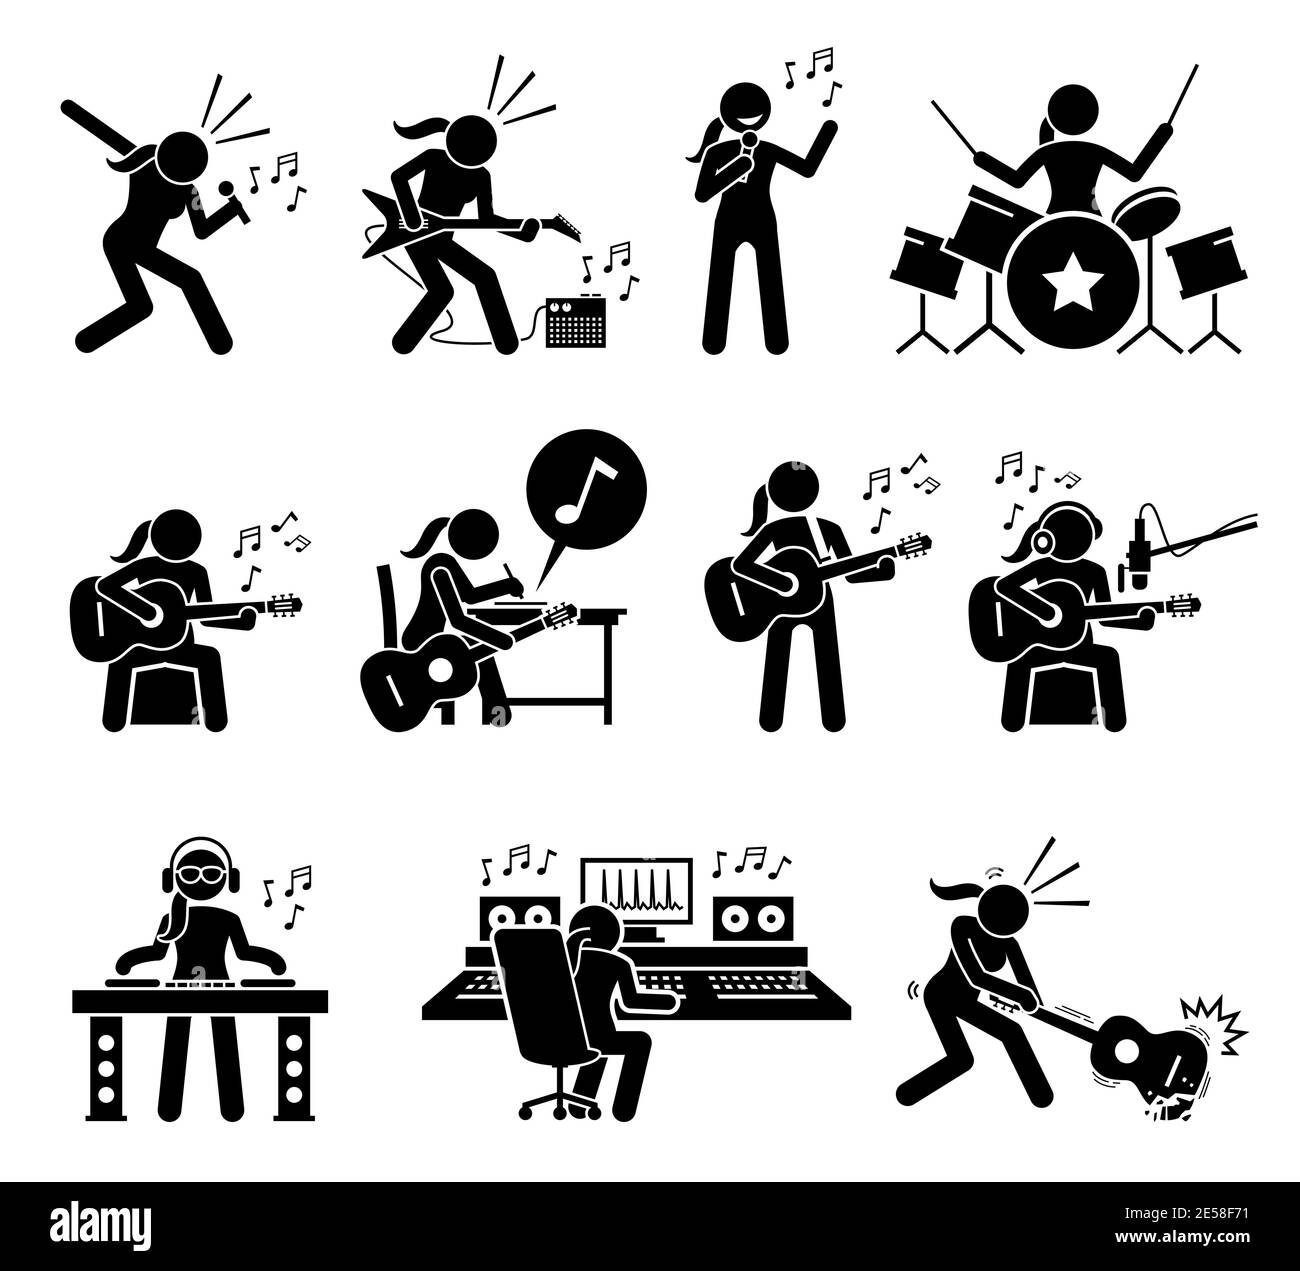 Female music artist singing song and playing musical instruments stick figure icons. Vector illustrations of woman playing guitar, drum, and writing s Stock Vector